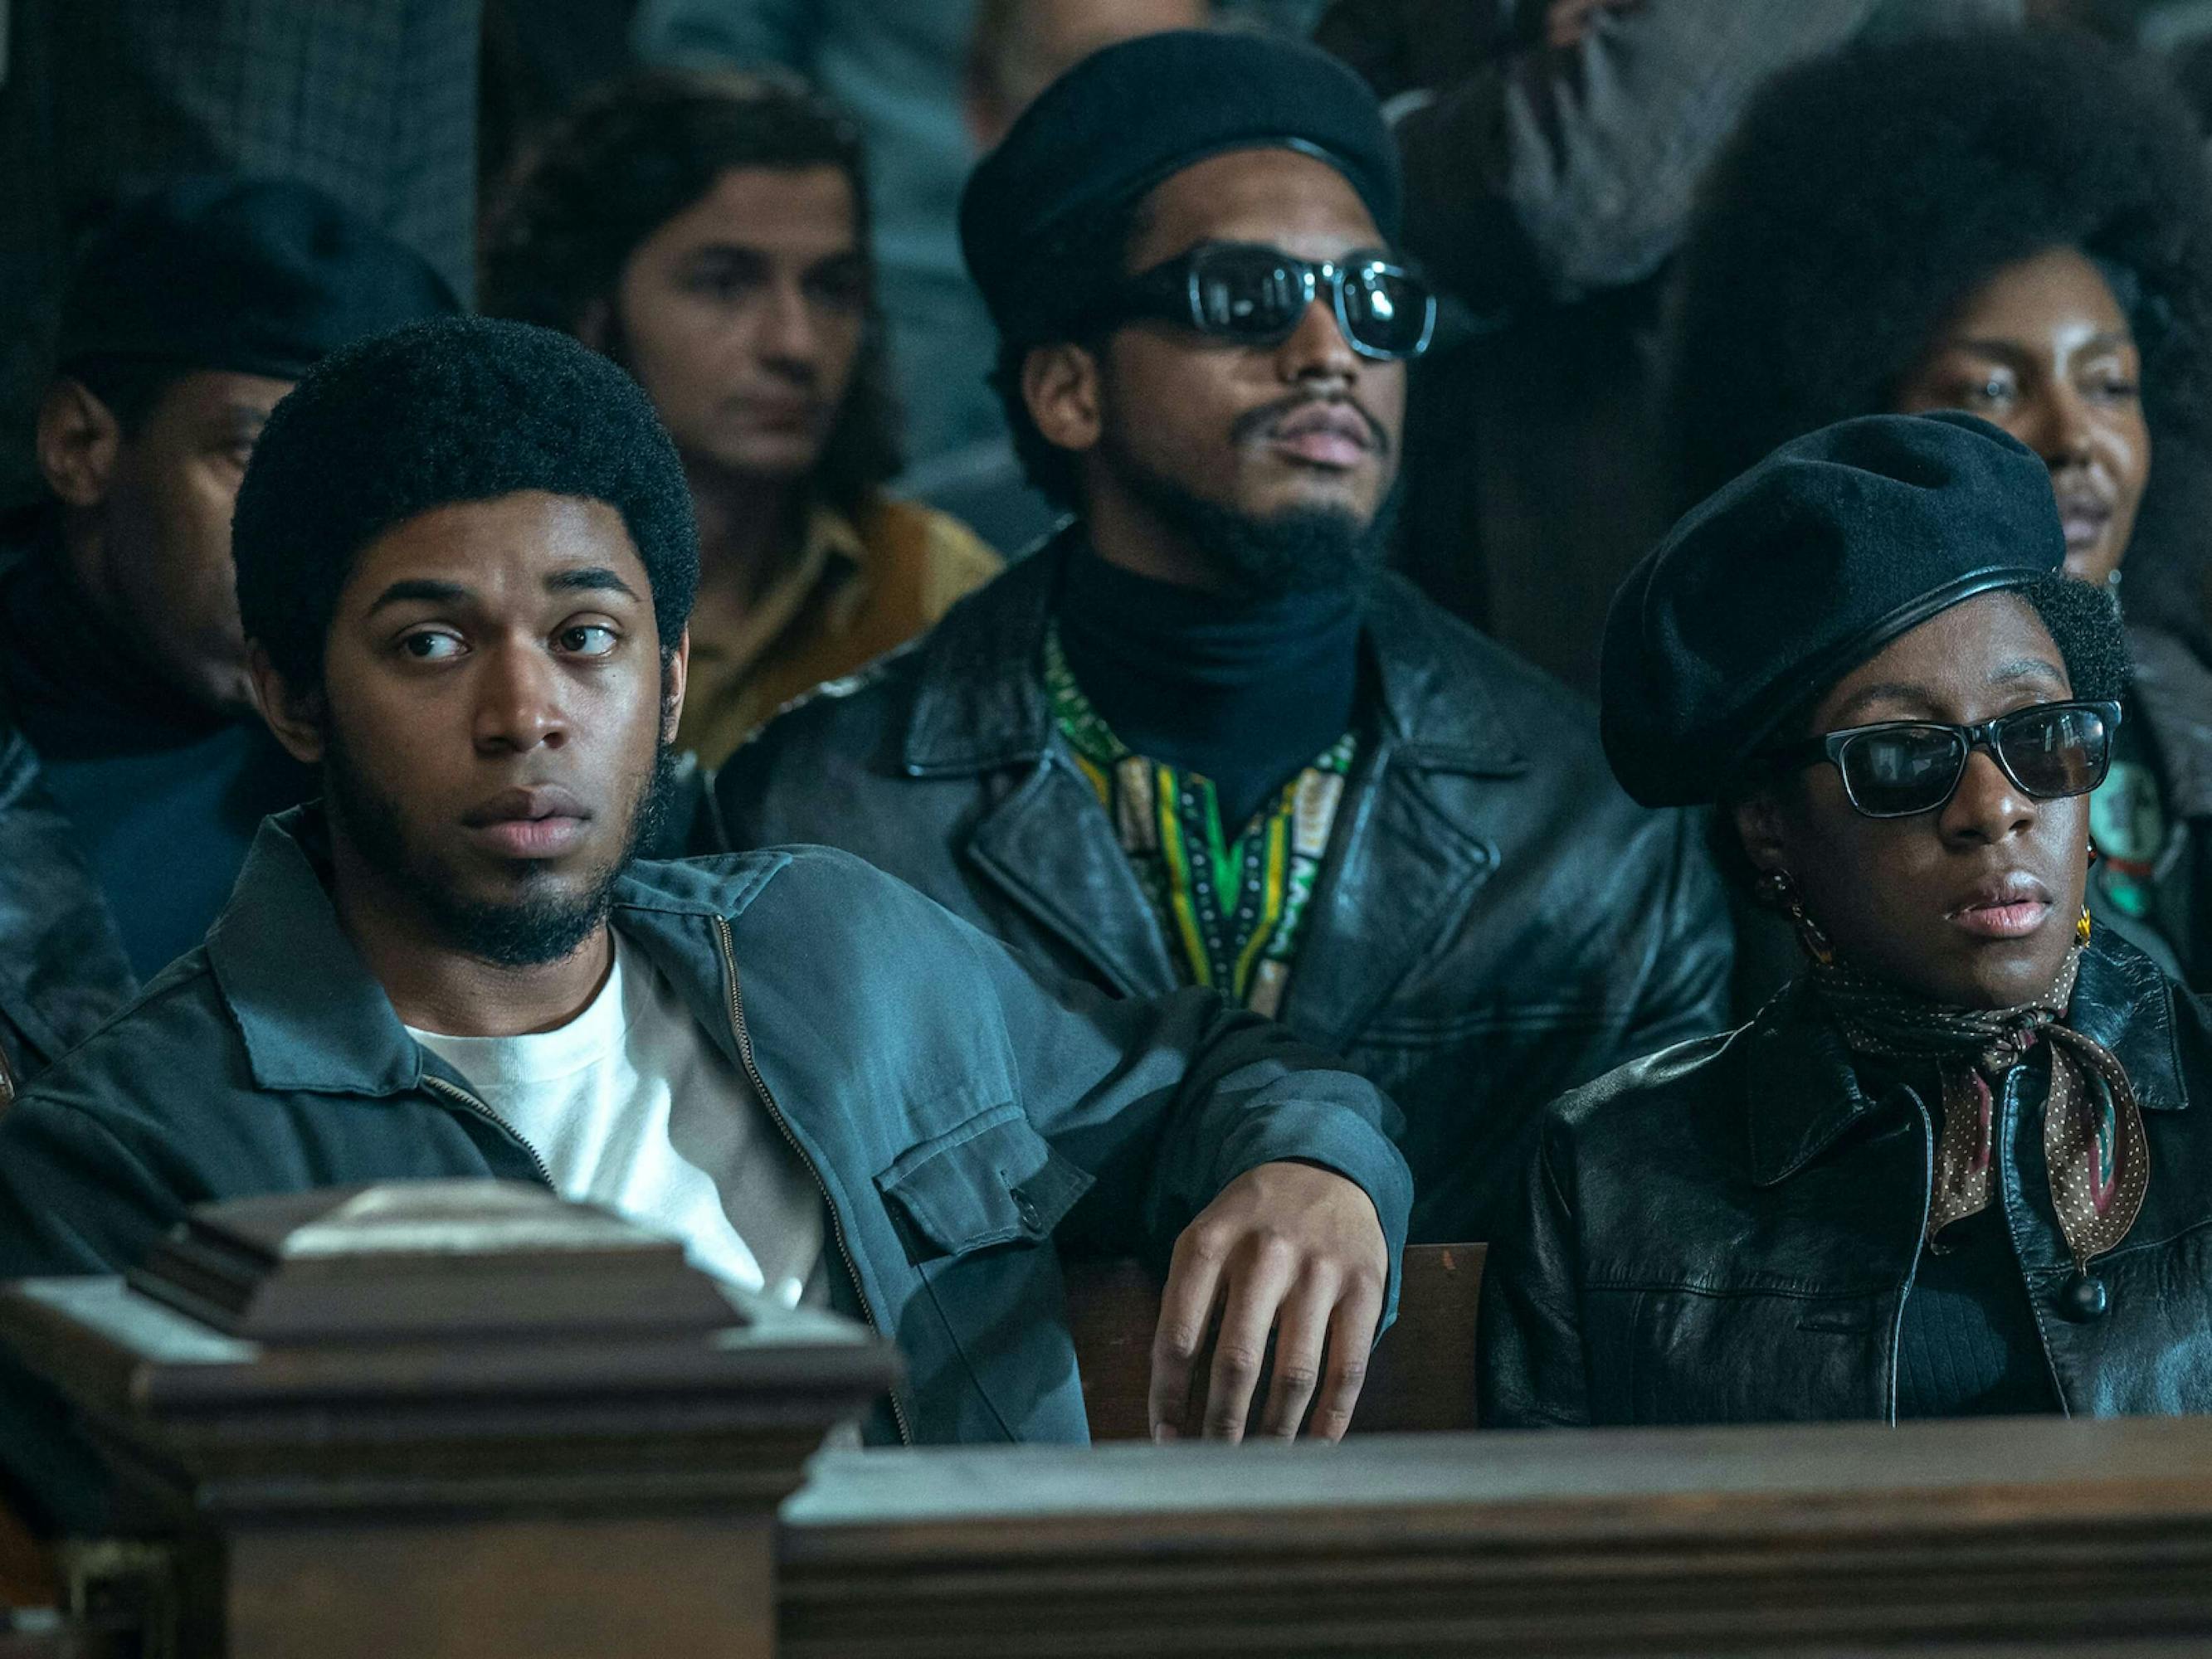 Harrison plays Black Panther Fred Hampton in The Trial of the Chicago 7. He wears a black jacket and white t-shirt, and he rests his elbow against a courtroom bench. He is surrounded by other people also wearing black.